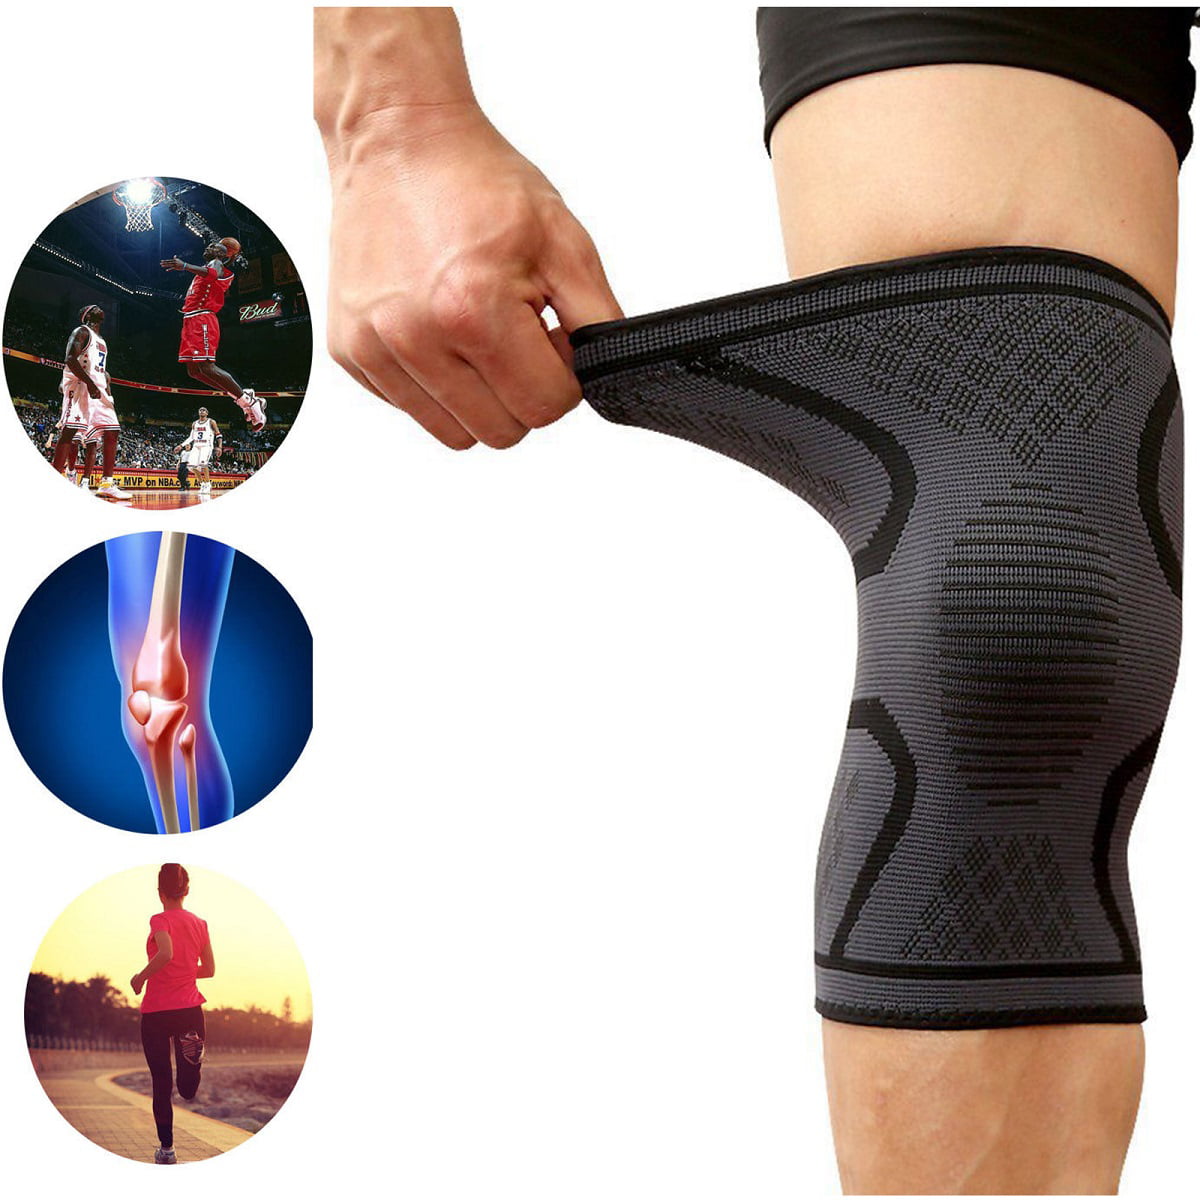 2Pcs Copper Fitness Compression Knee Support Sleeve Brace Patella Arthritis Pain Relief Fitness Cycling Running Knee Pads Black